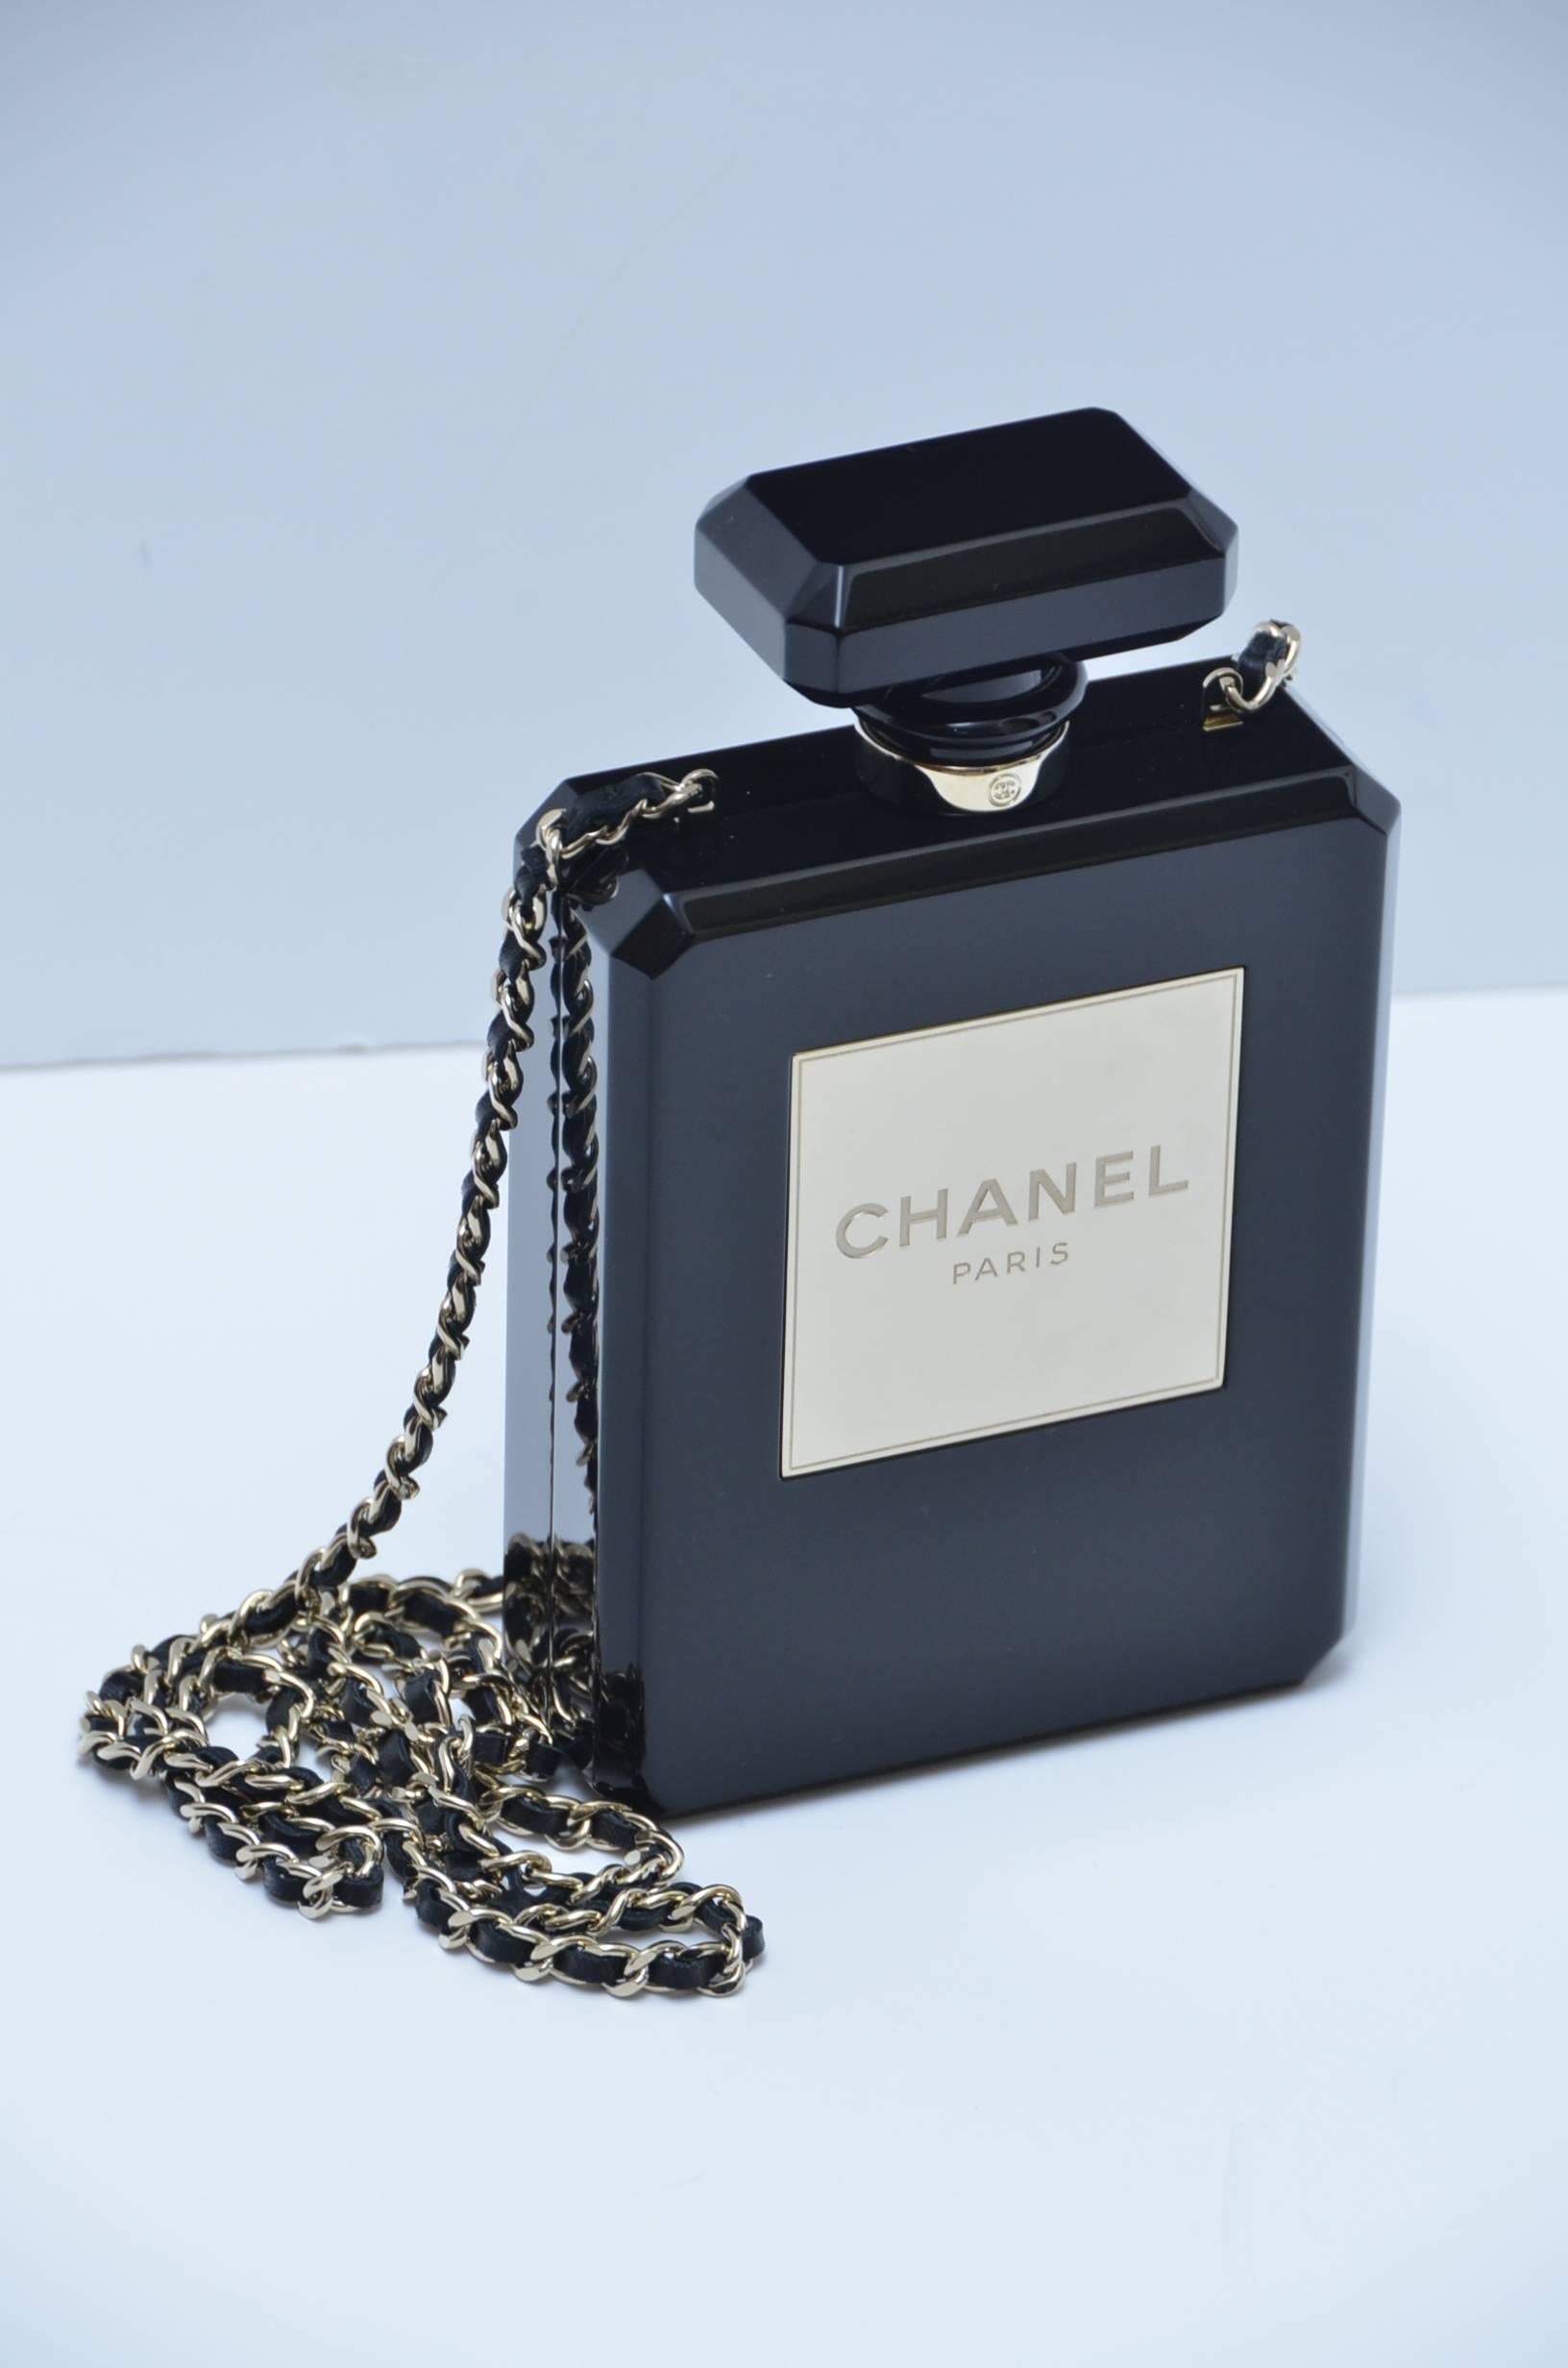 Limited Edition  runway  black plexiglass CHANEL No. 5 Perfume bottle  handbag /clutch.
Excellent mint 9 out of 10 condition.Few very minor hard to see hairline scratches outside and inside.Lined in lambskin leather inside.
Hologram inside and